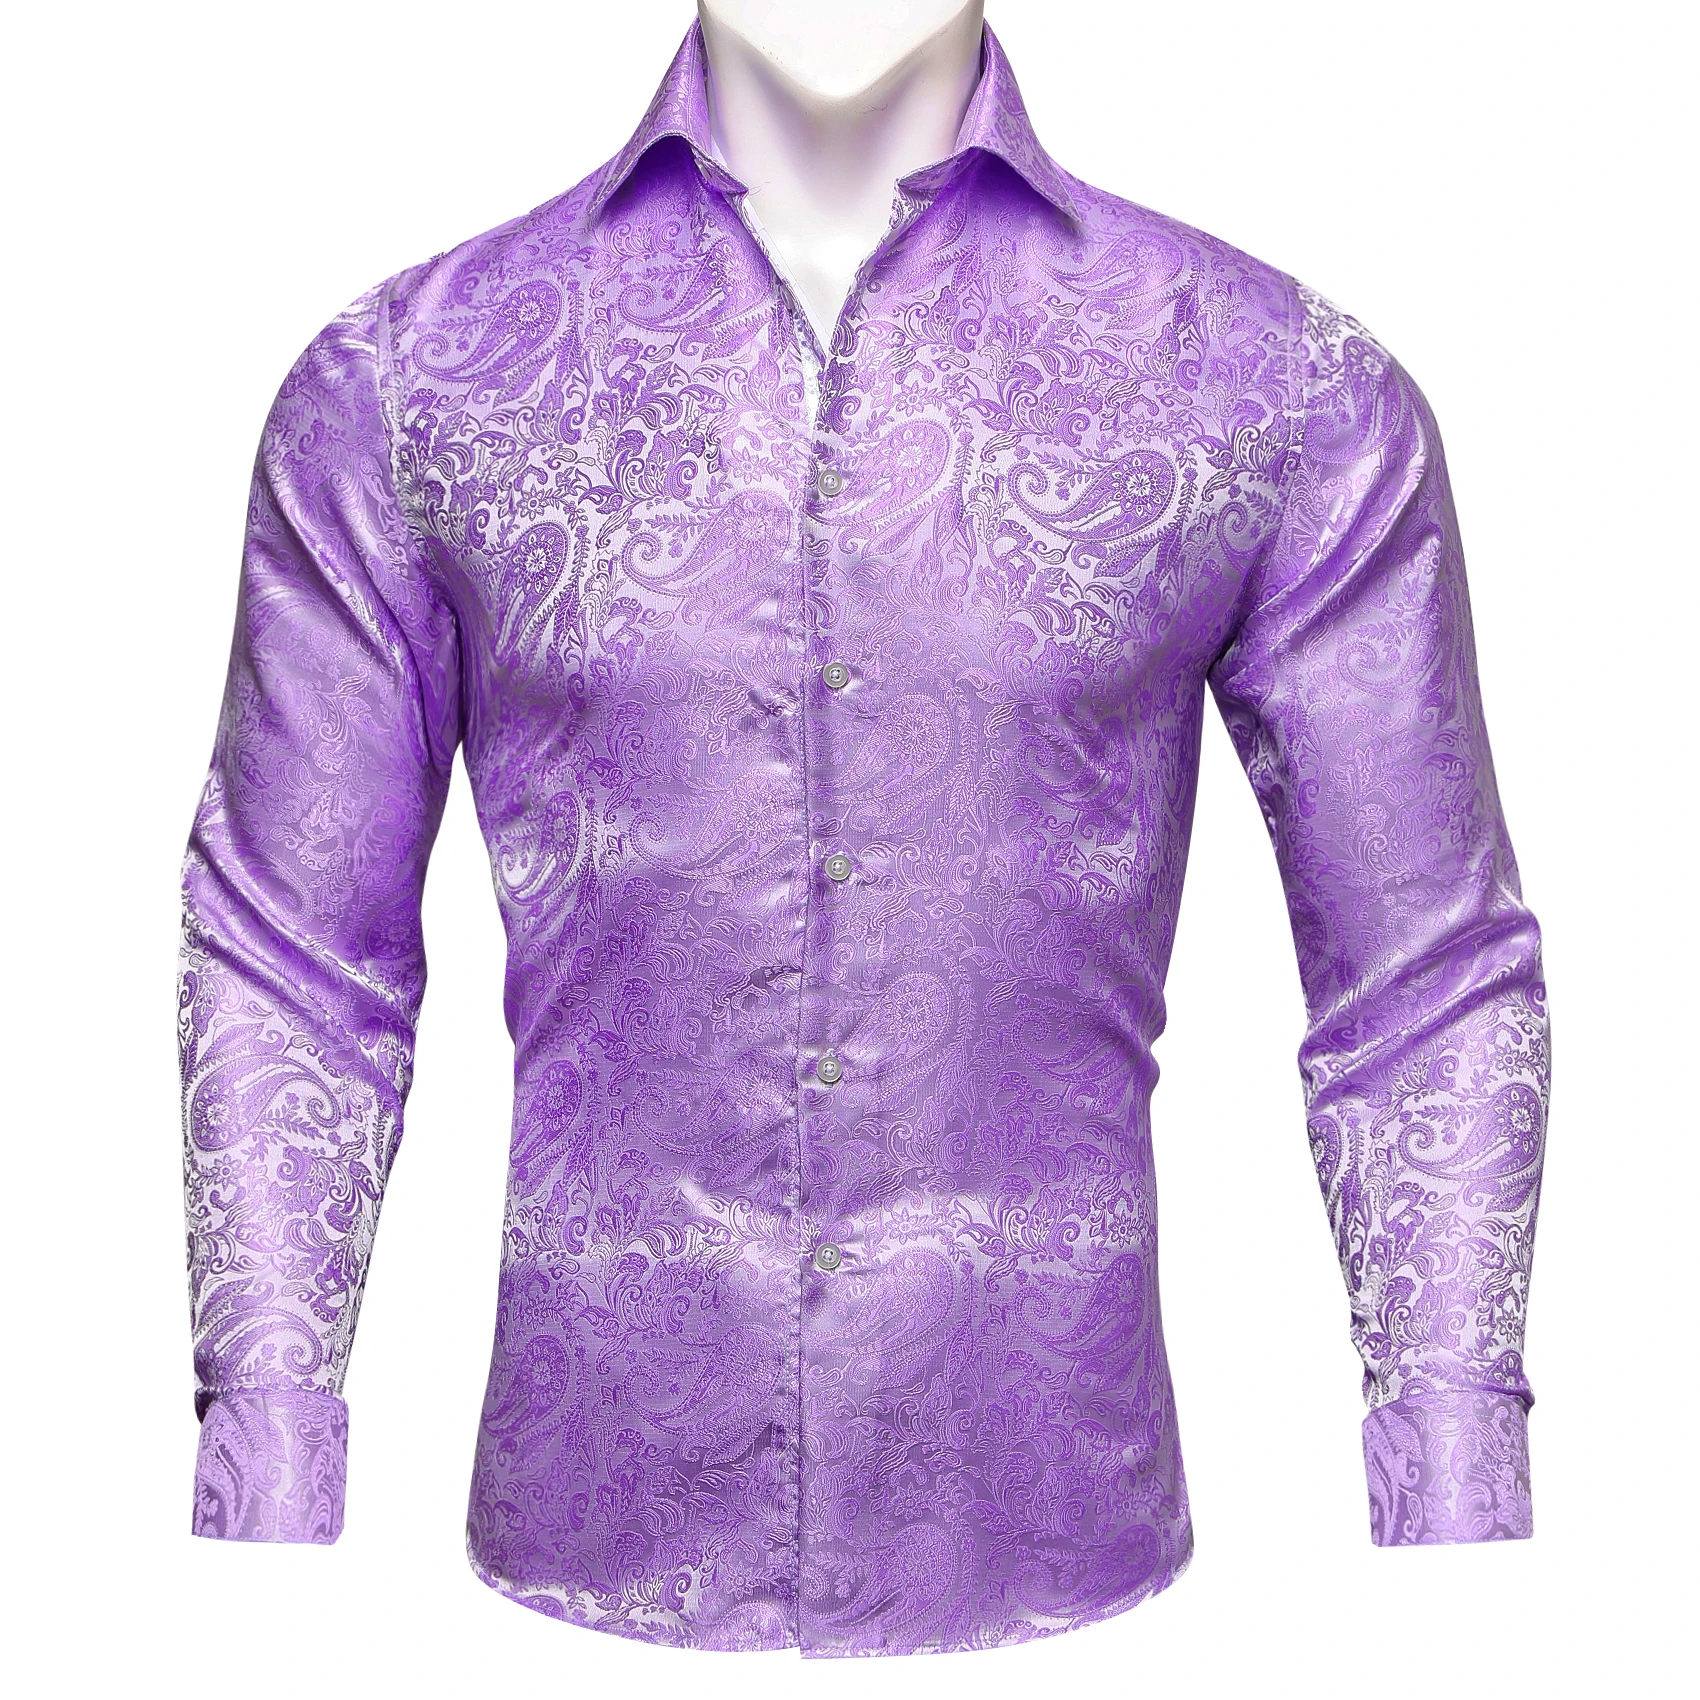 

Fashion Violet Men Shirt Spring Autumn Lapel Woven Long Sleeve Paisley Leisure Fit Party Wedding Exquisite Barry.Wang CY-0416